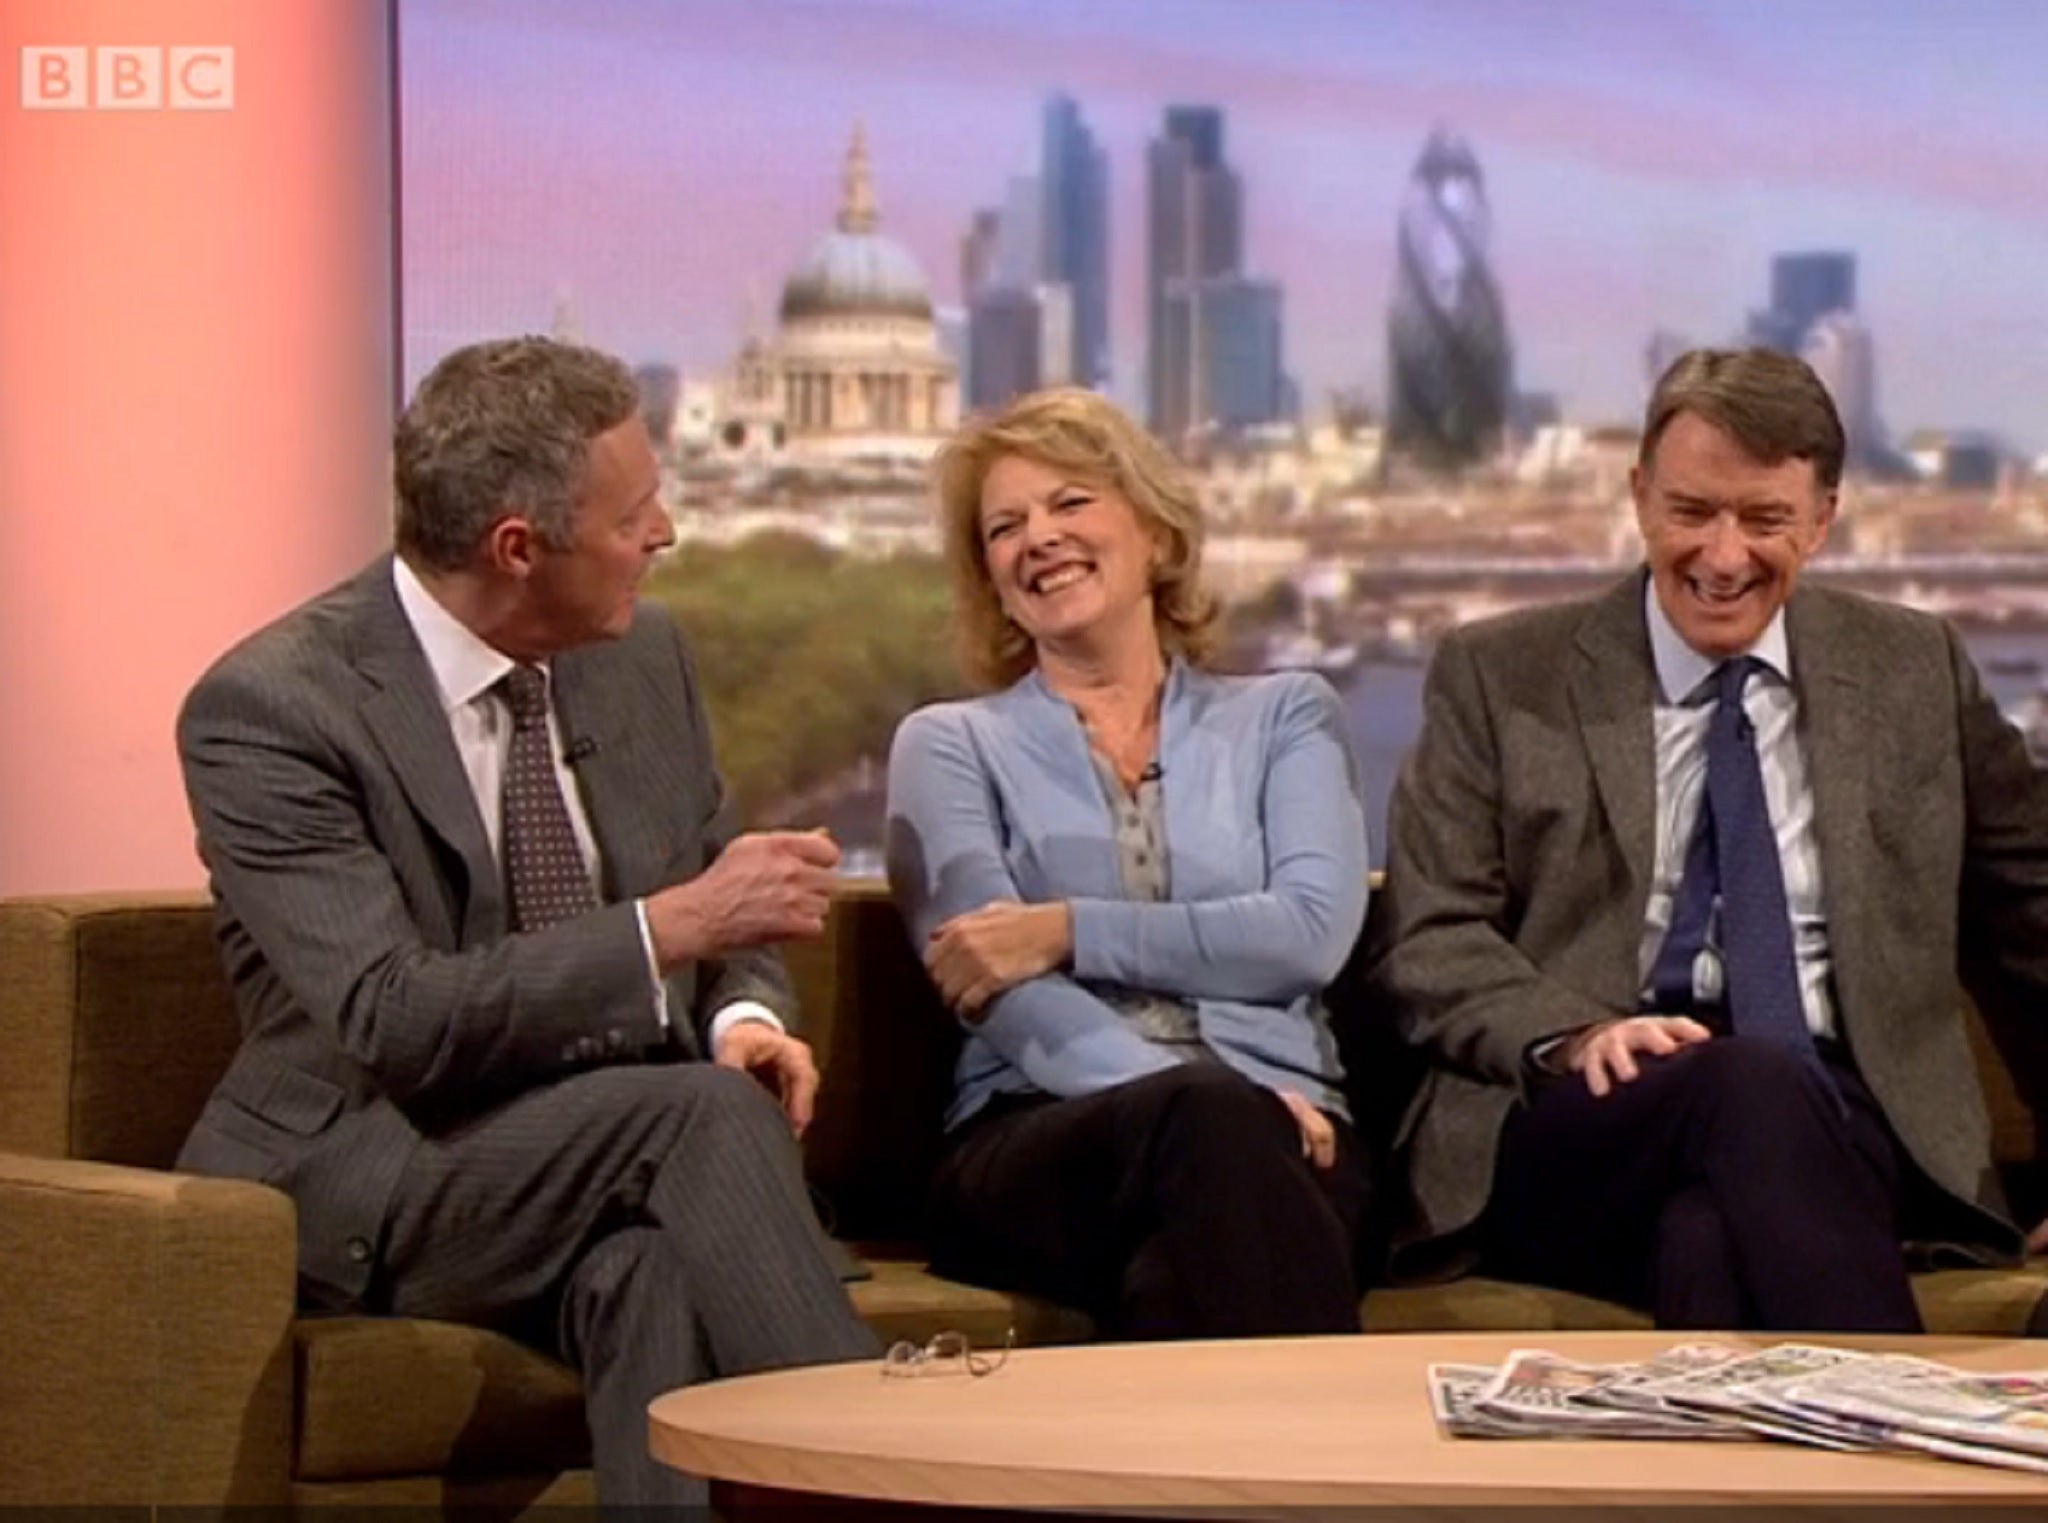 The Tory MP Anna Soubry said Nigel Farage 'looks like someone put their finger up his bottom' after an impression by comedian Rory Bremner (left)